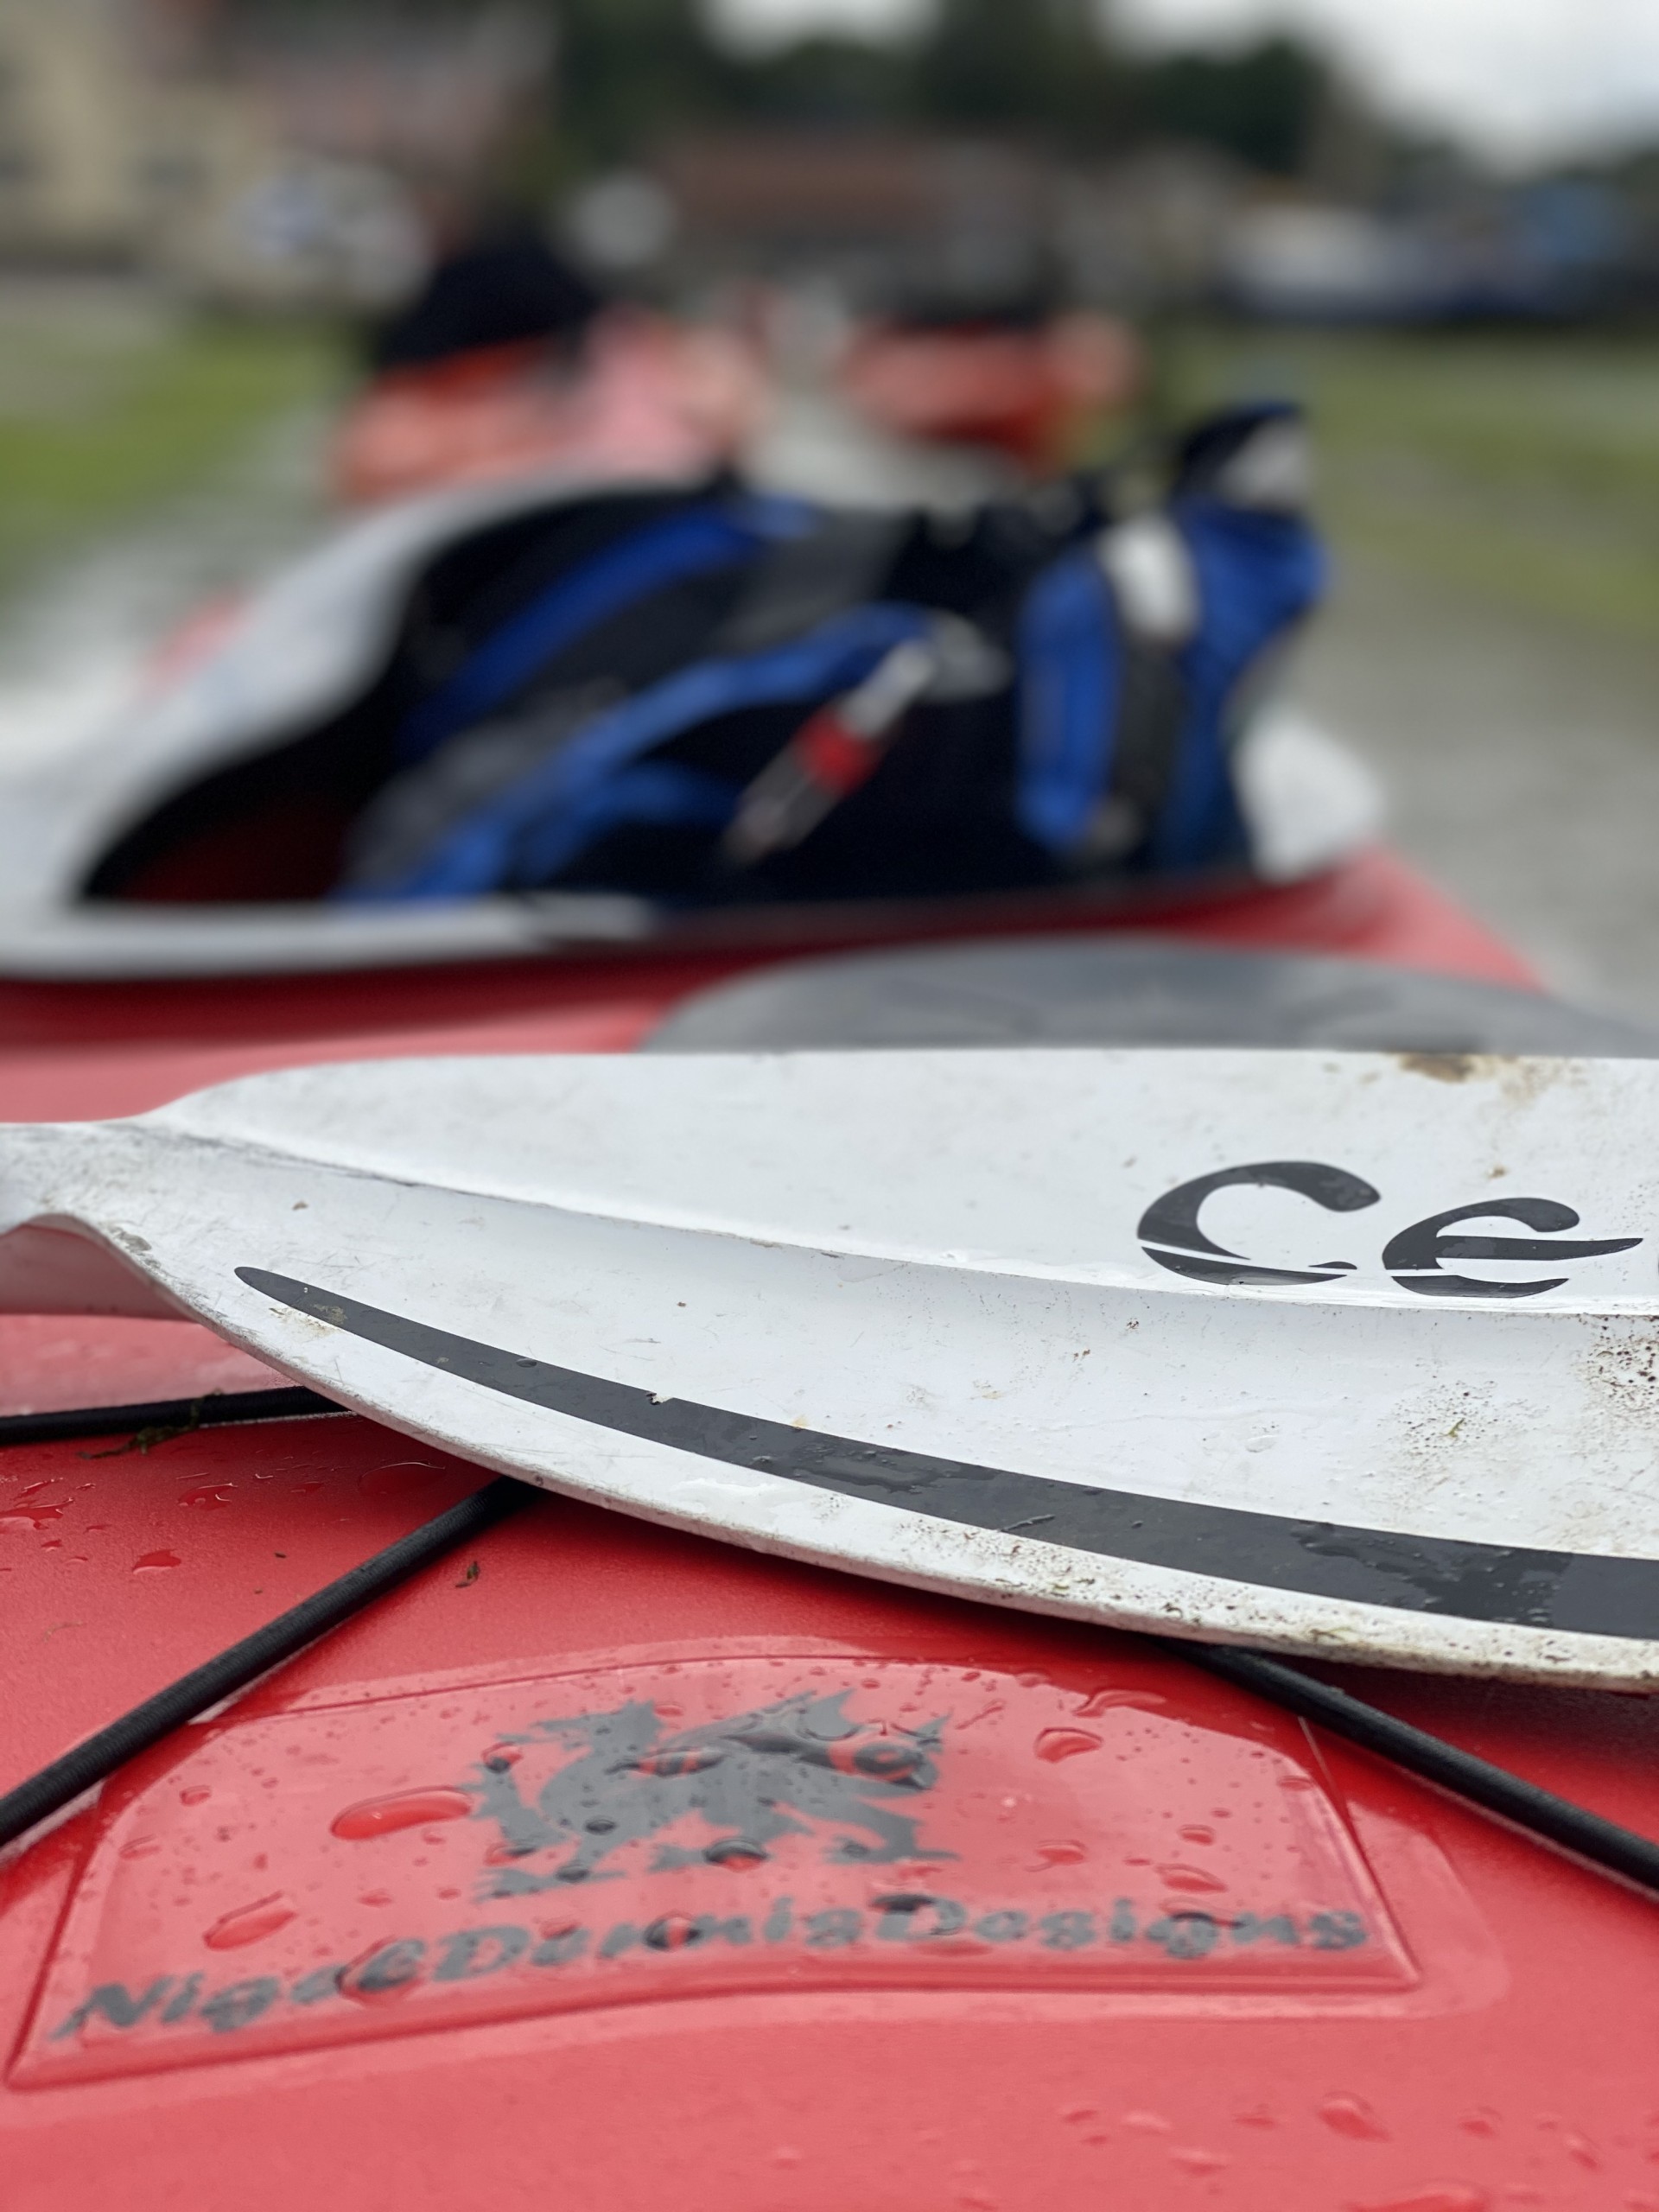 A Celtic paddle lying across the red deck of a sea kayak.